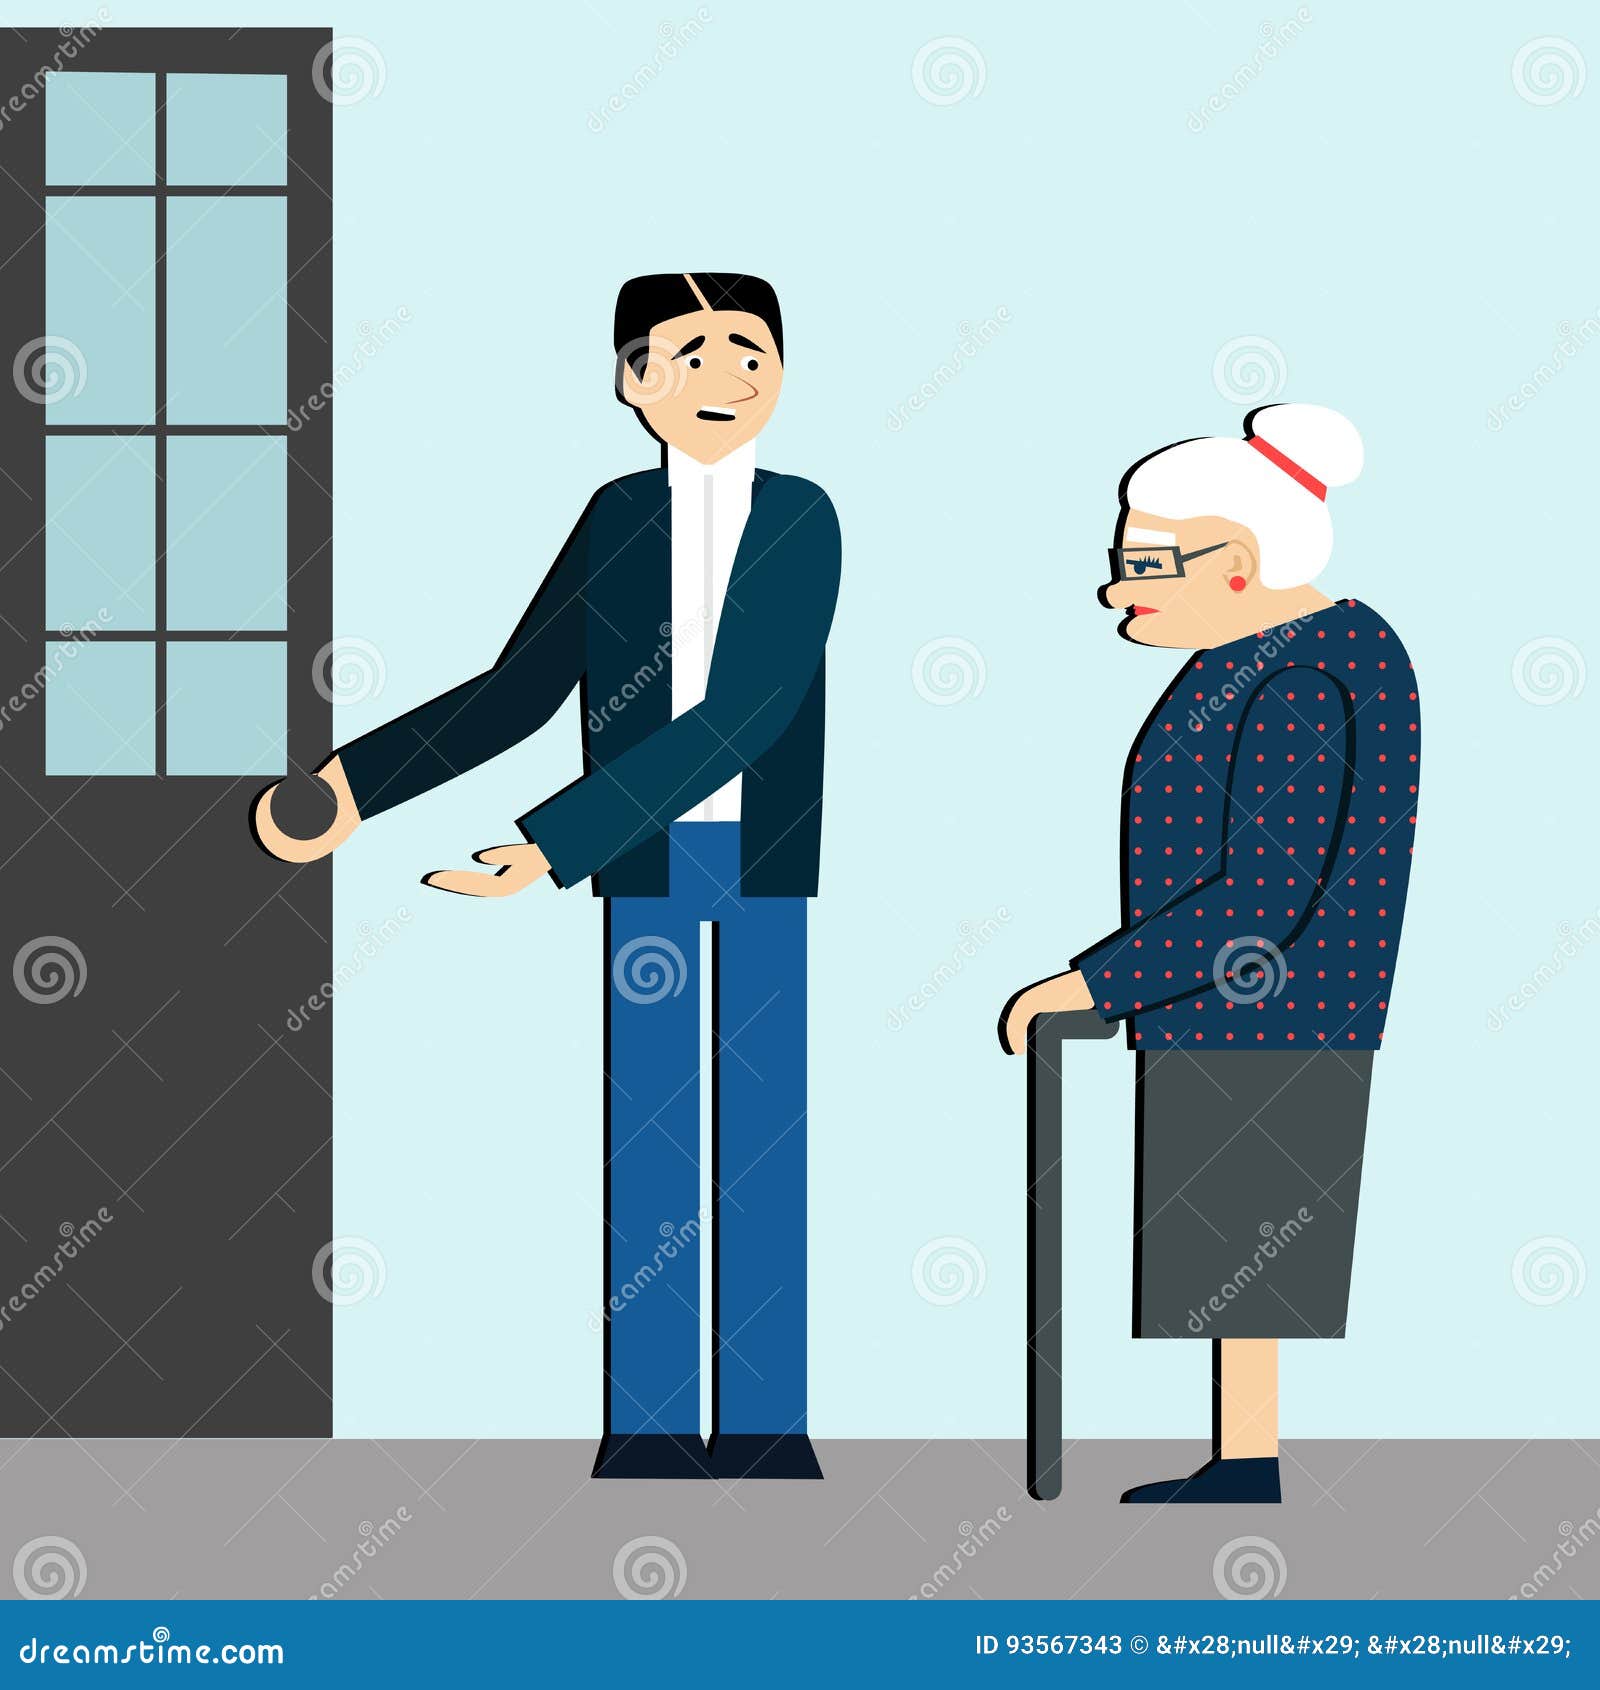 good manners. man open the door to an elderly person.tired woman.etiquette.polite man